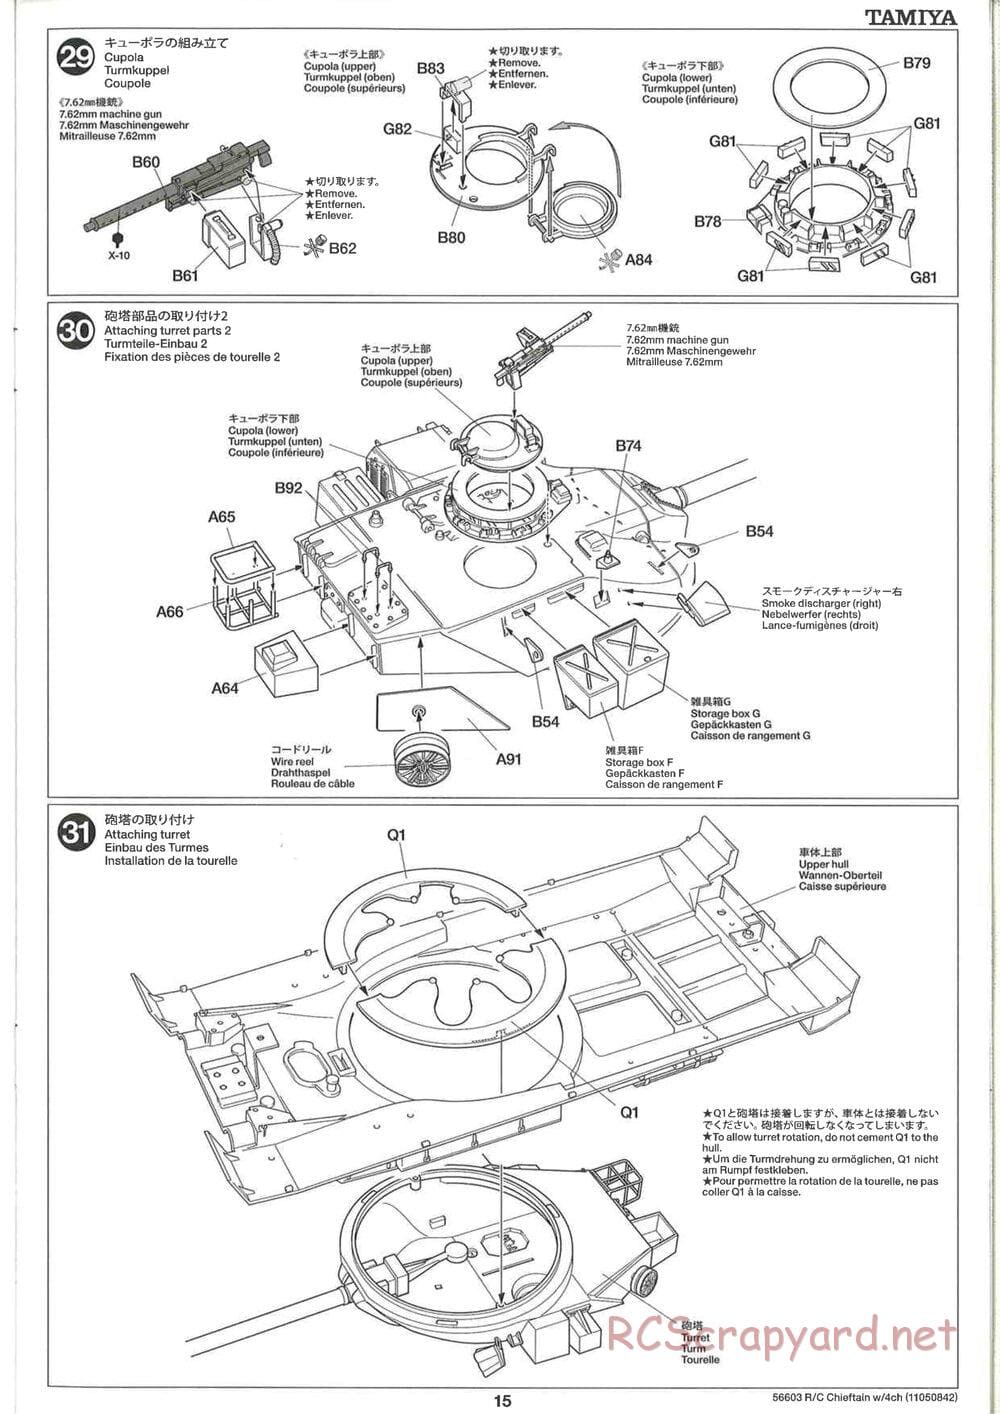 Tamiya - British Army Battle Tank Cheiftain - 1/25 Scale Chassis - Manual - Page 15